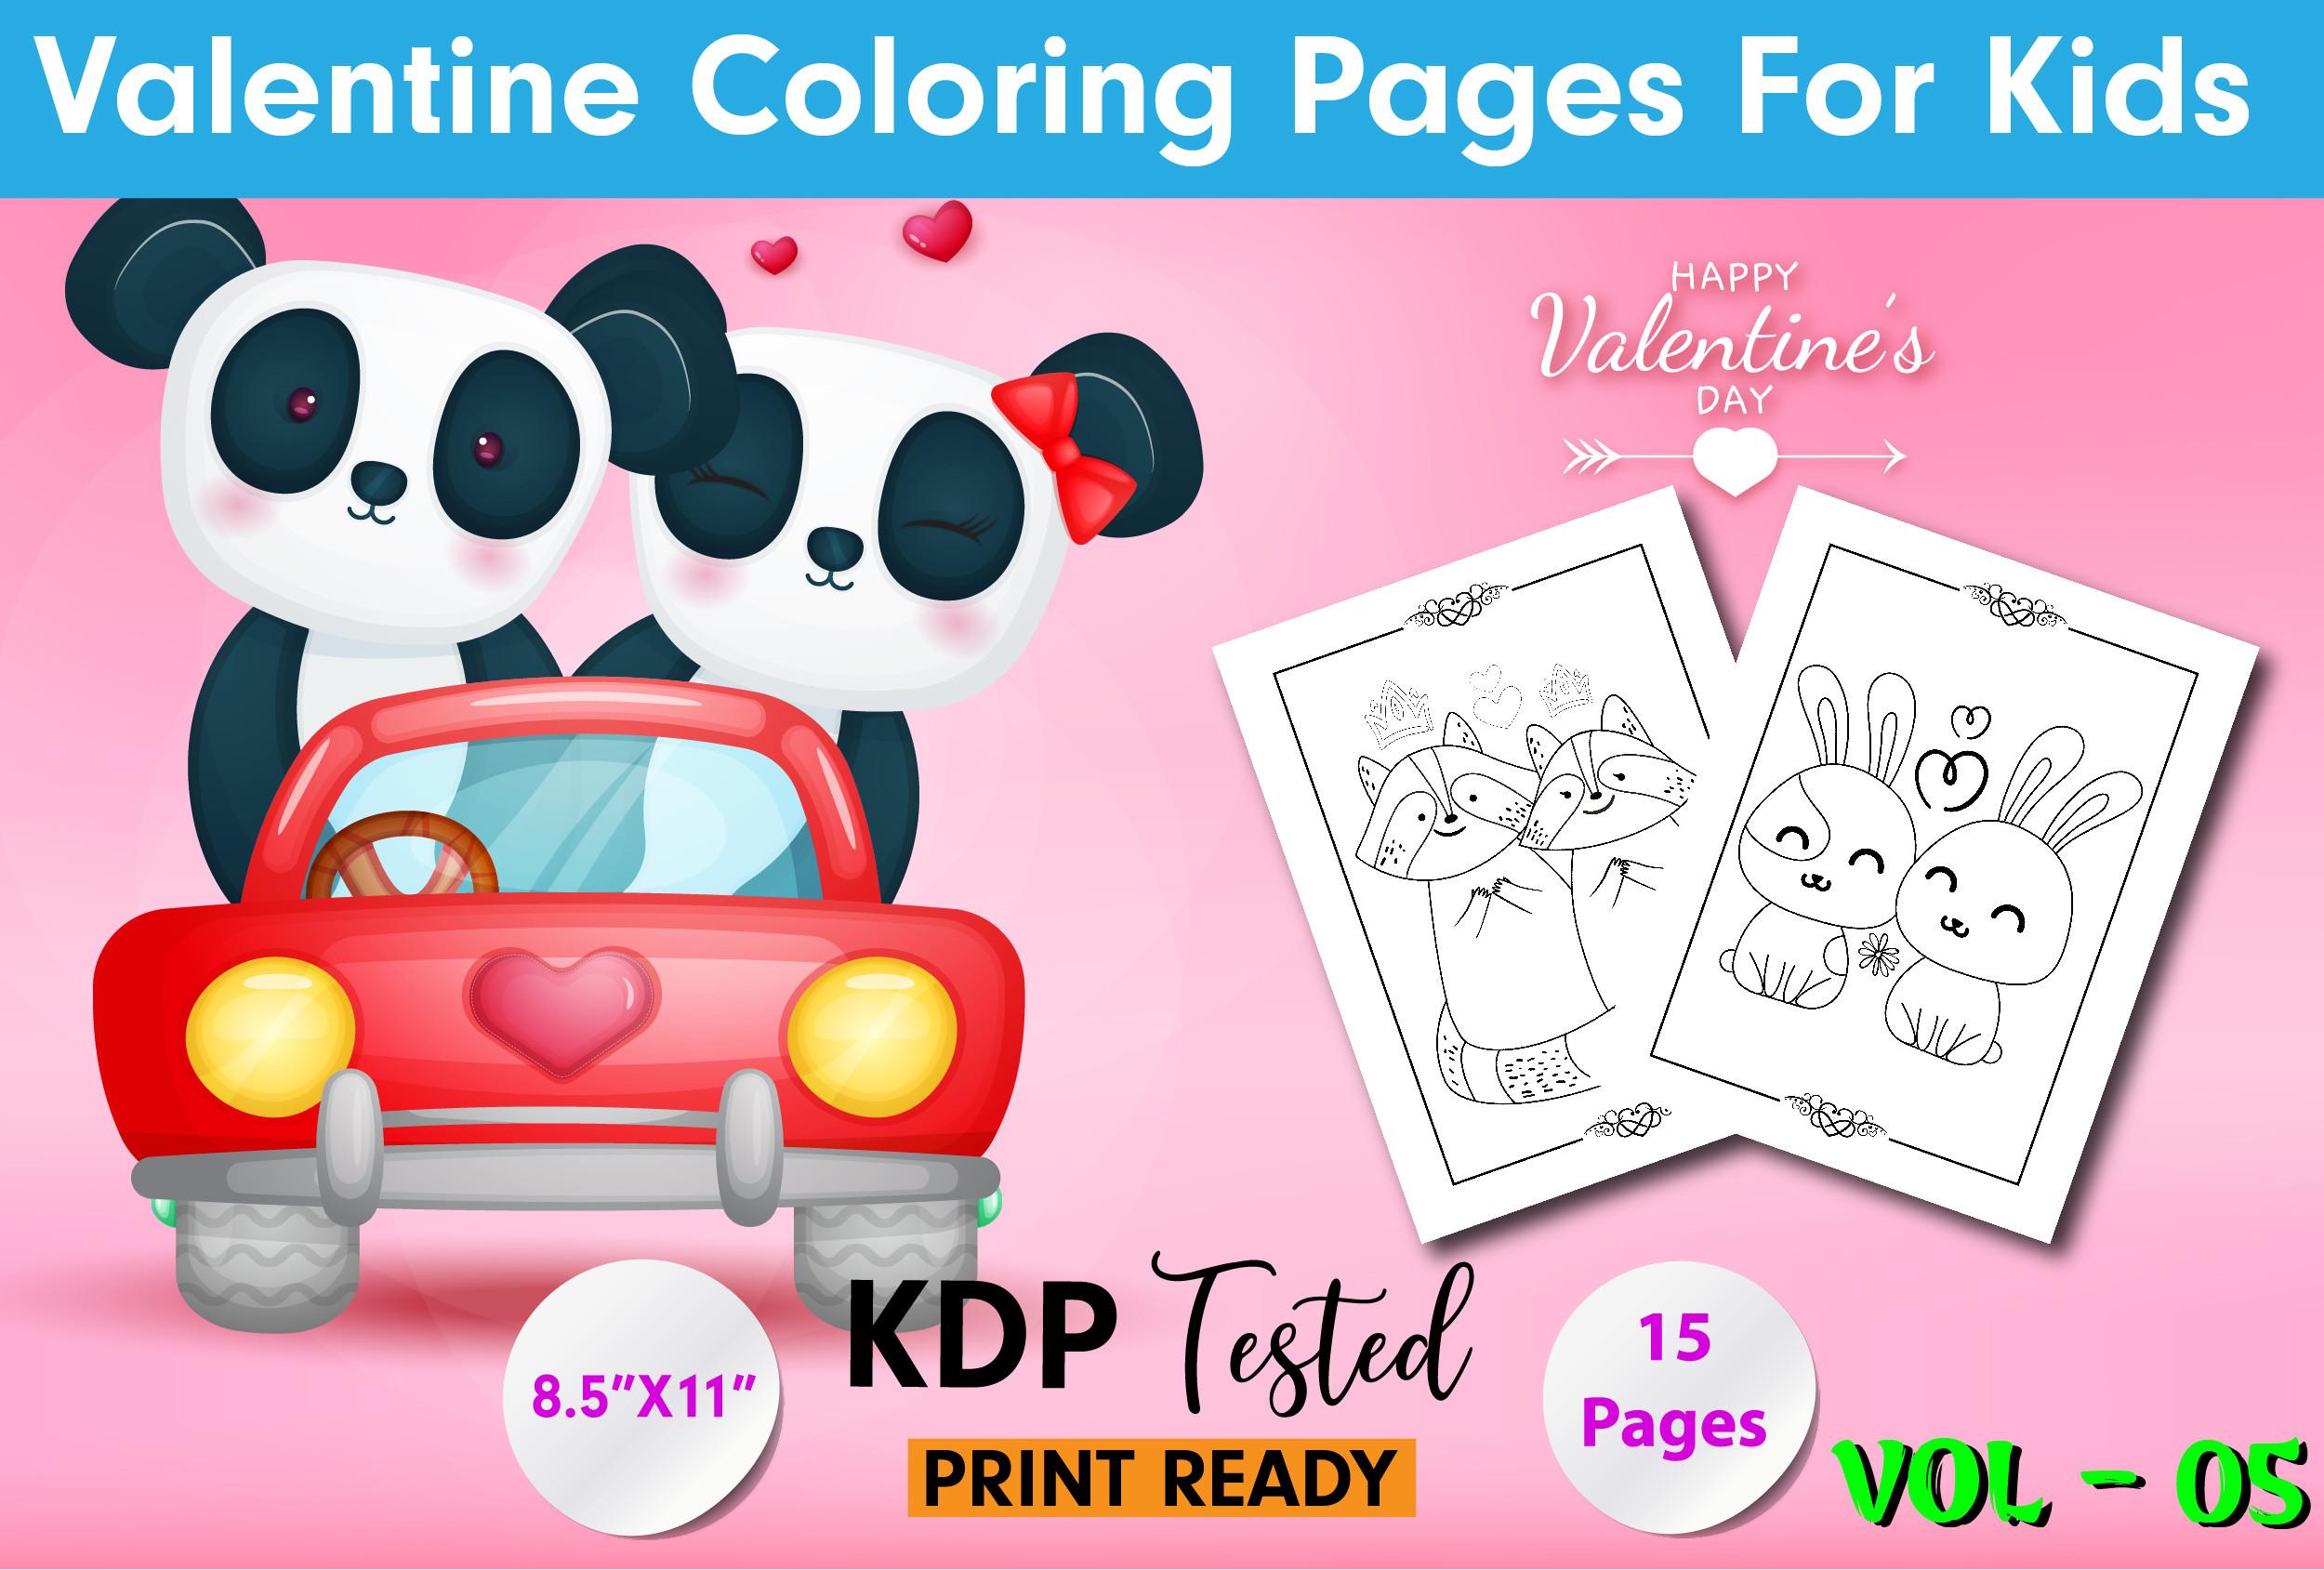 Valentine Coloring Page for Kids Vol-05